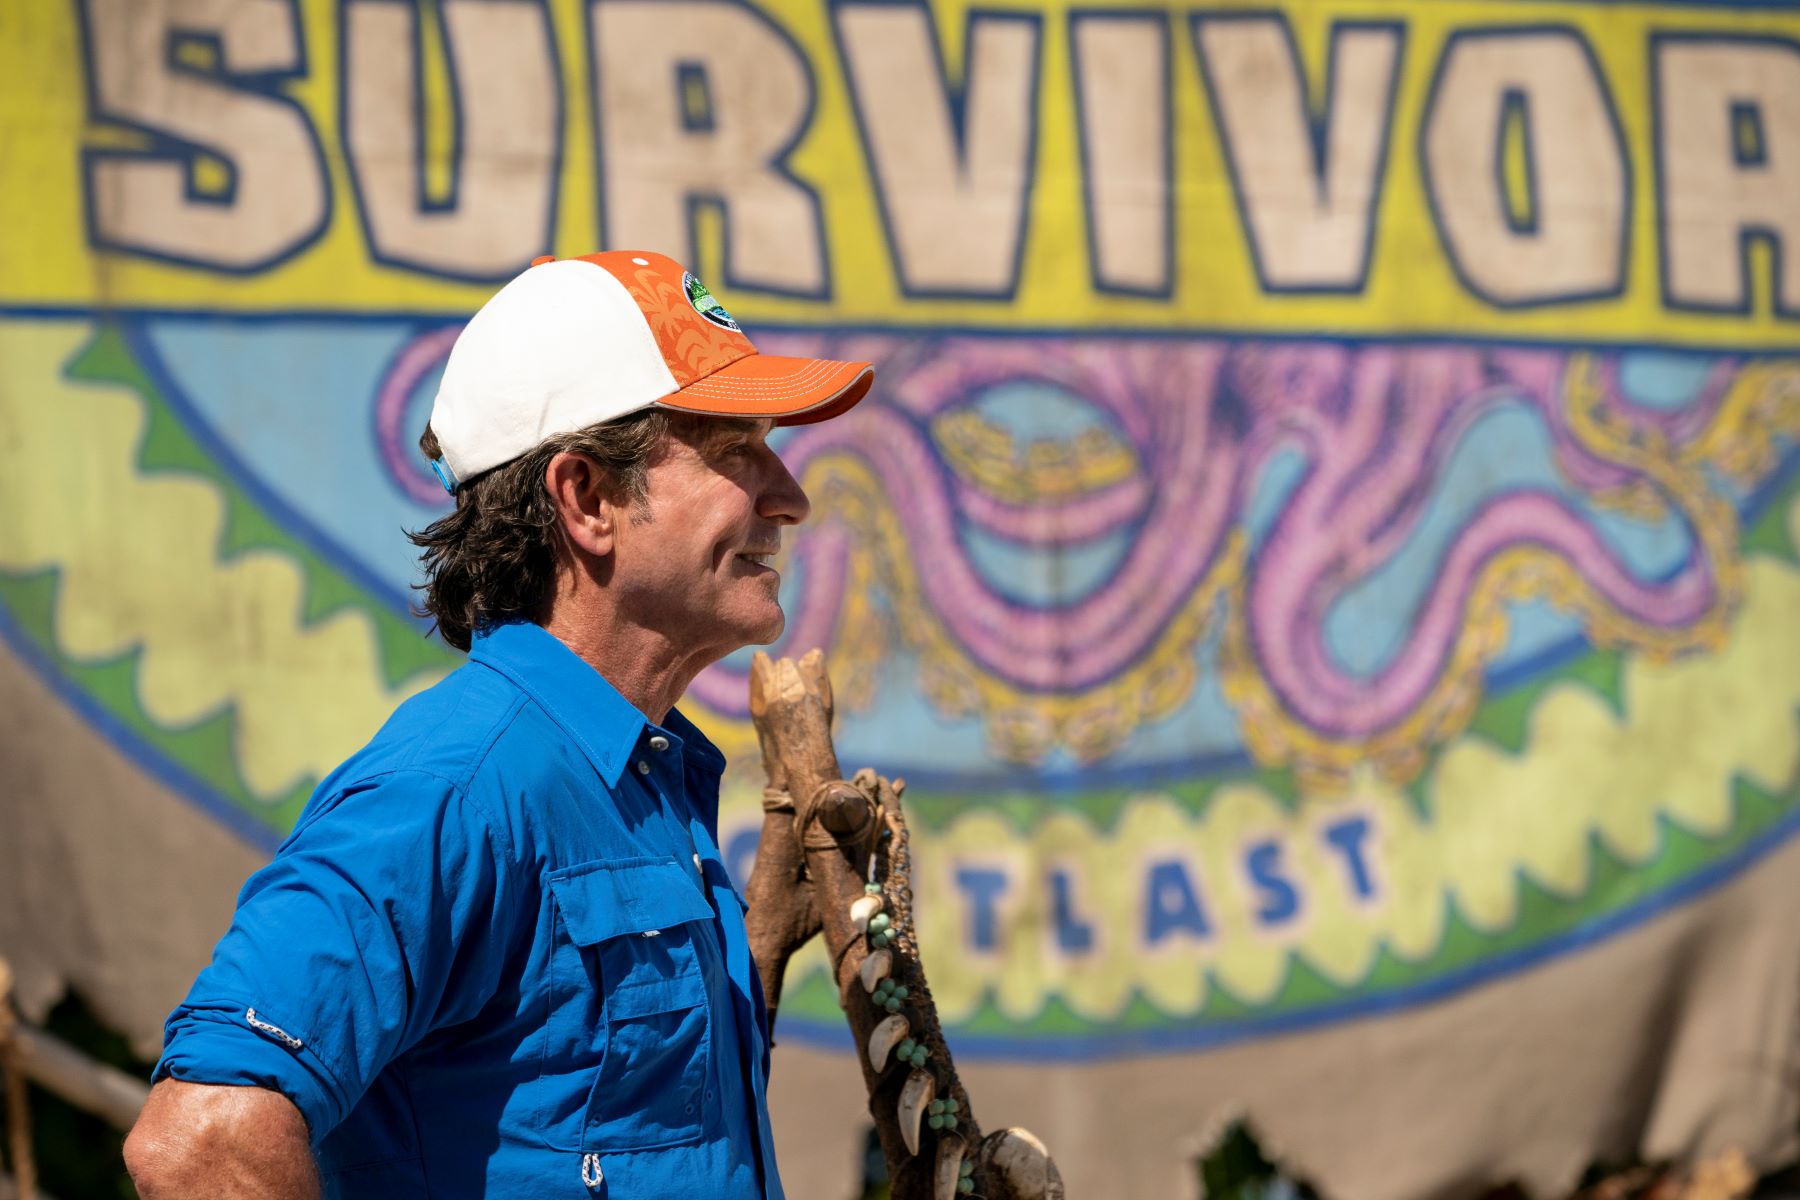 Jeff Probst, the host of 'Survivor' on CBS, wears a blue button-up shirt and orange and white 'Survivor' baseball hat.